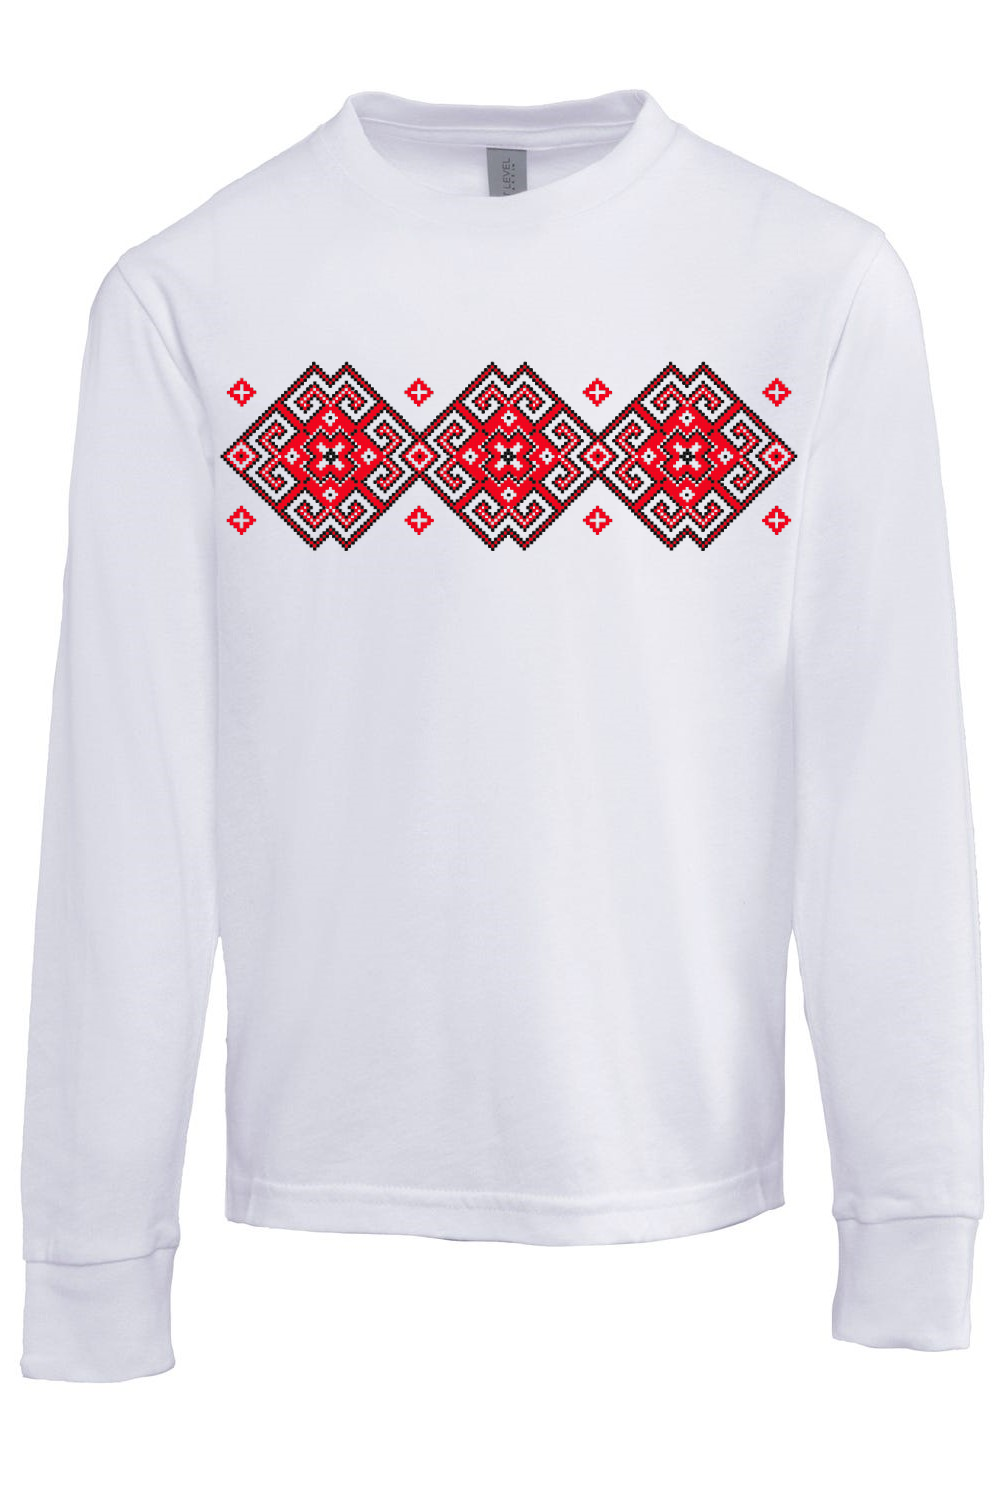 Youth long sleeve shirt "Vortex" red